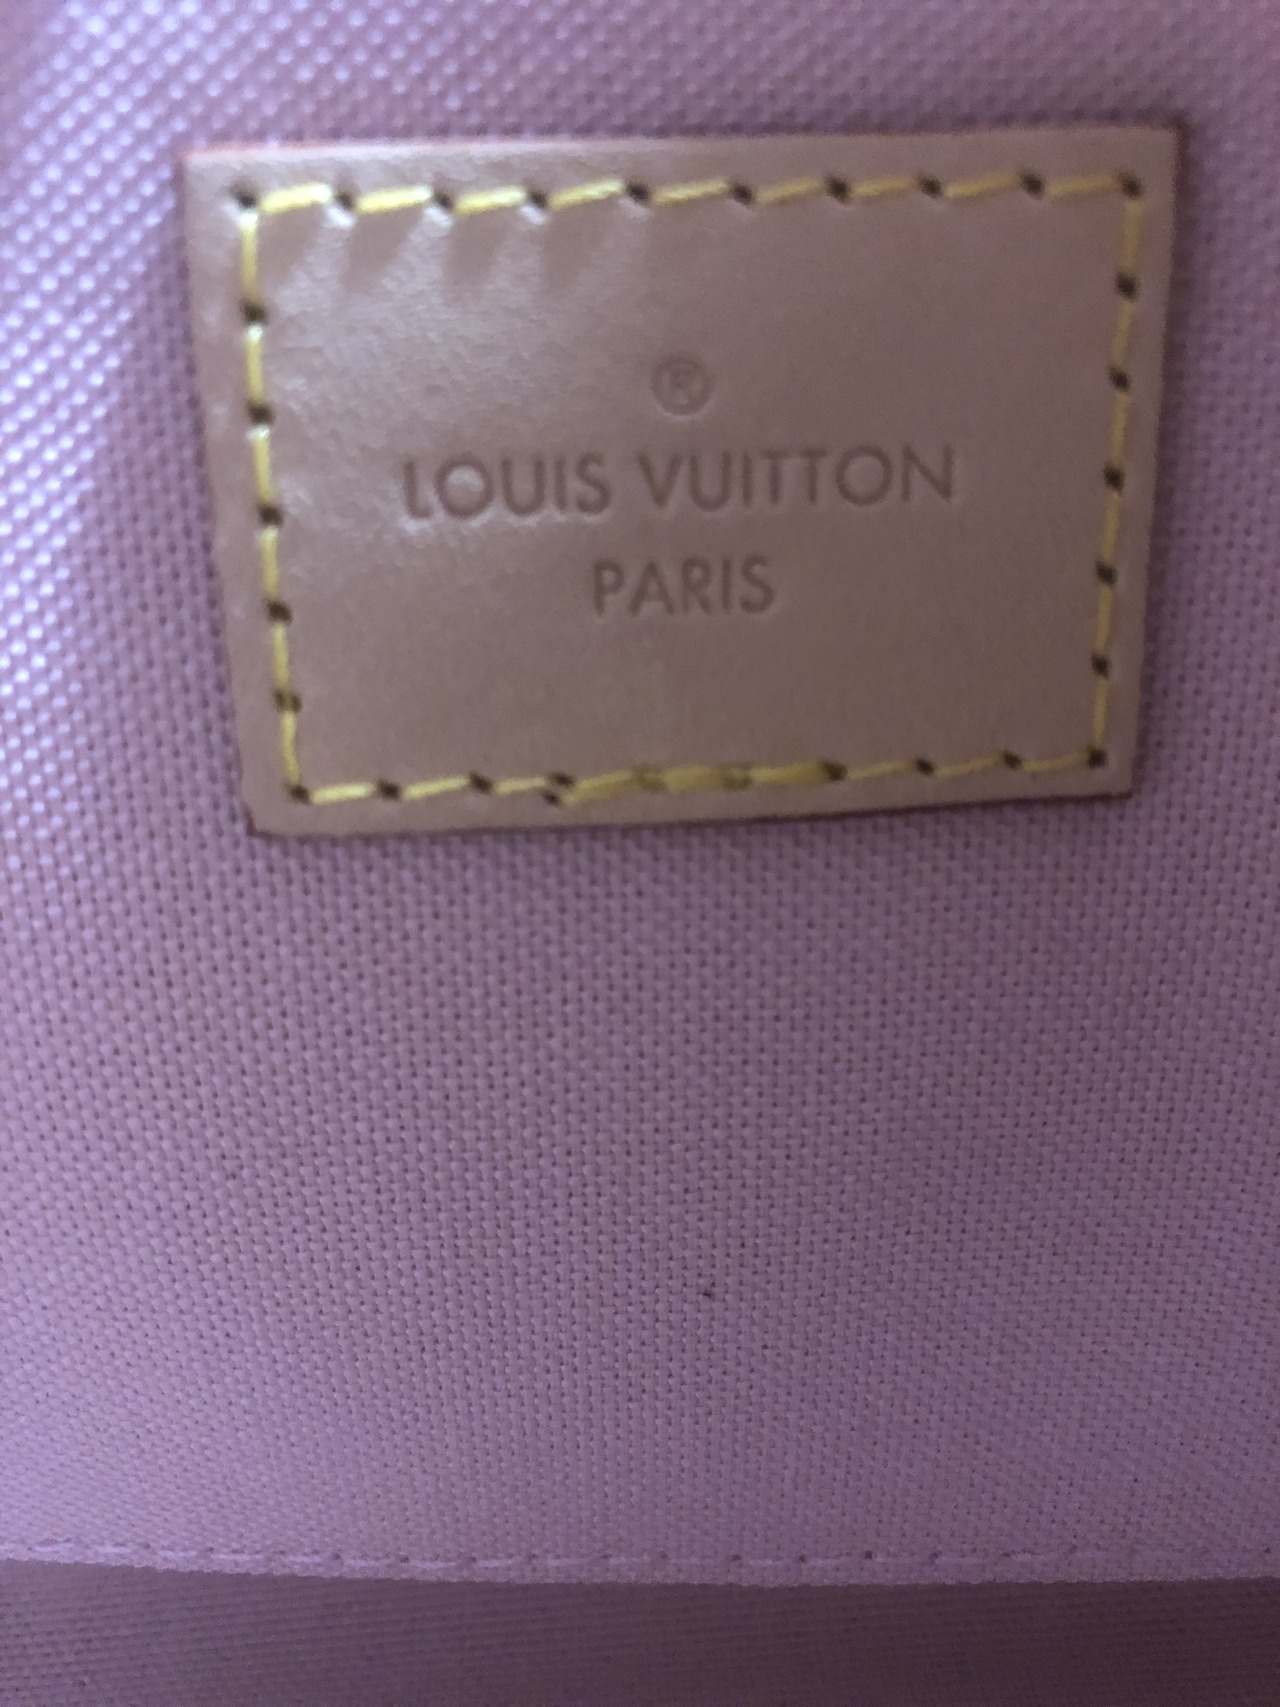 Just purchased my new LV and have a question about microchips : r